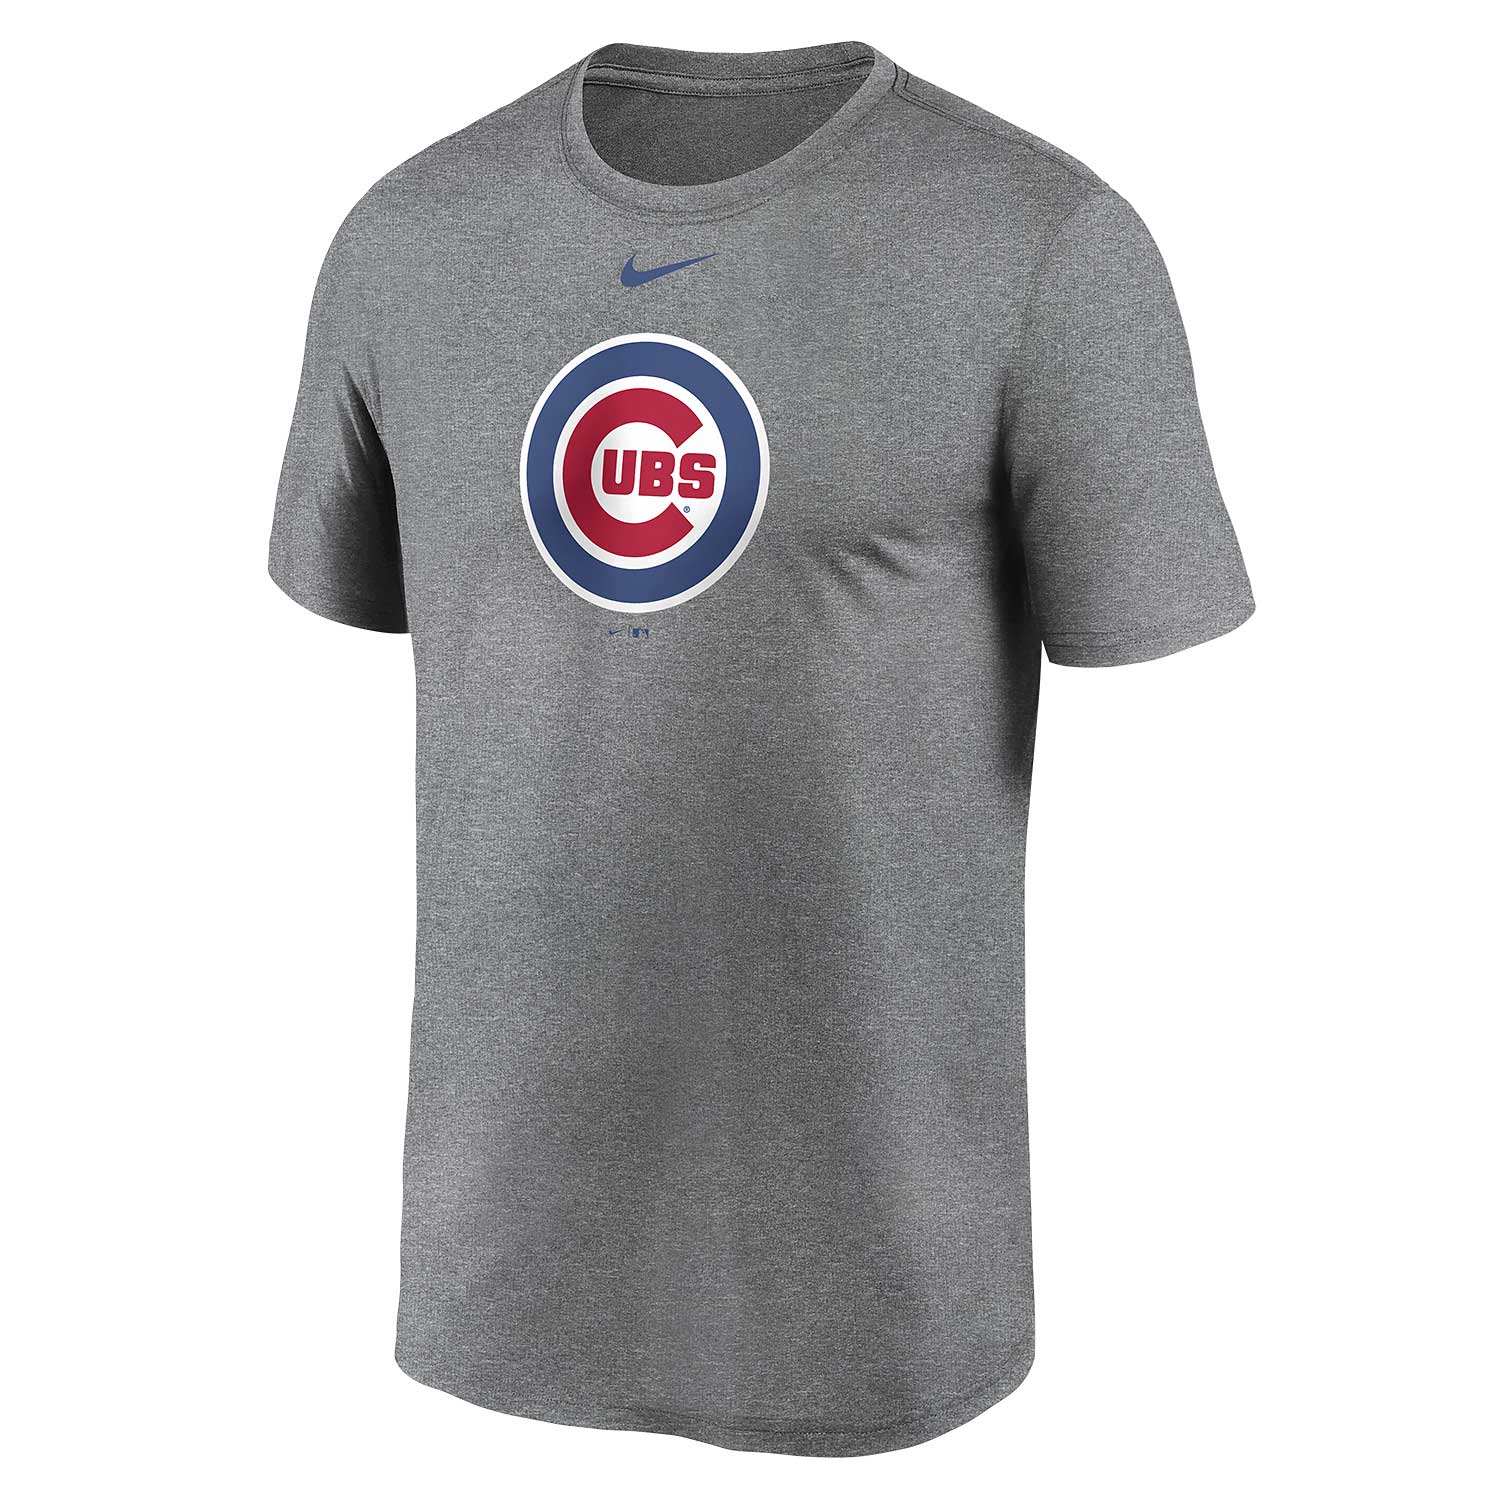 Men's Nike Heather Charcoal Chicago Cubs New Legend Logo T-Shirt Size: Small